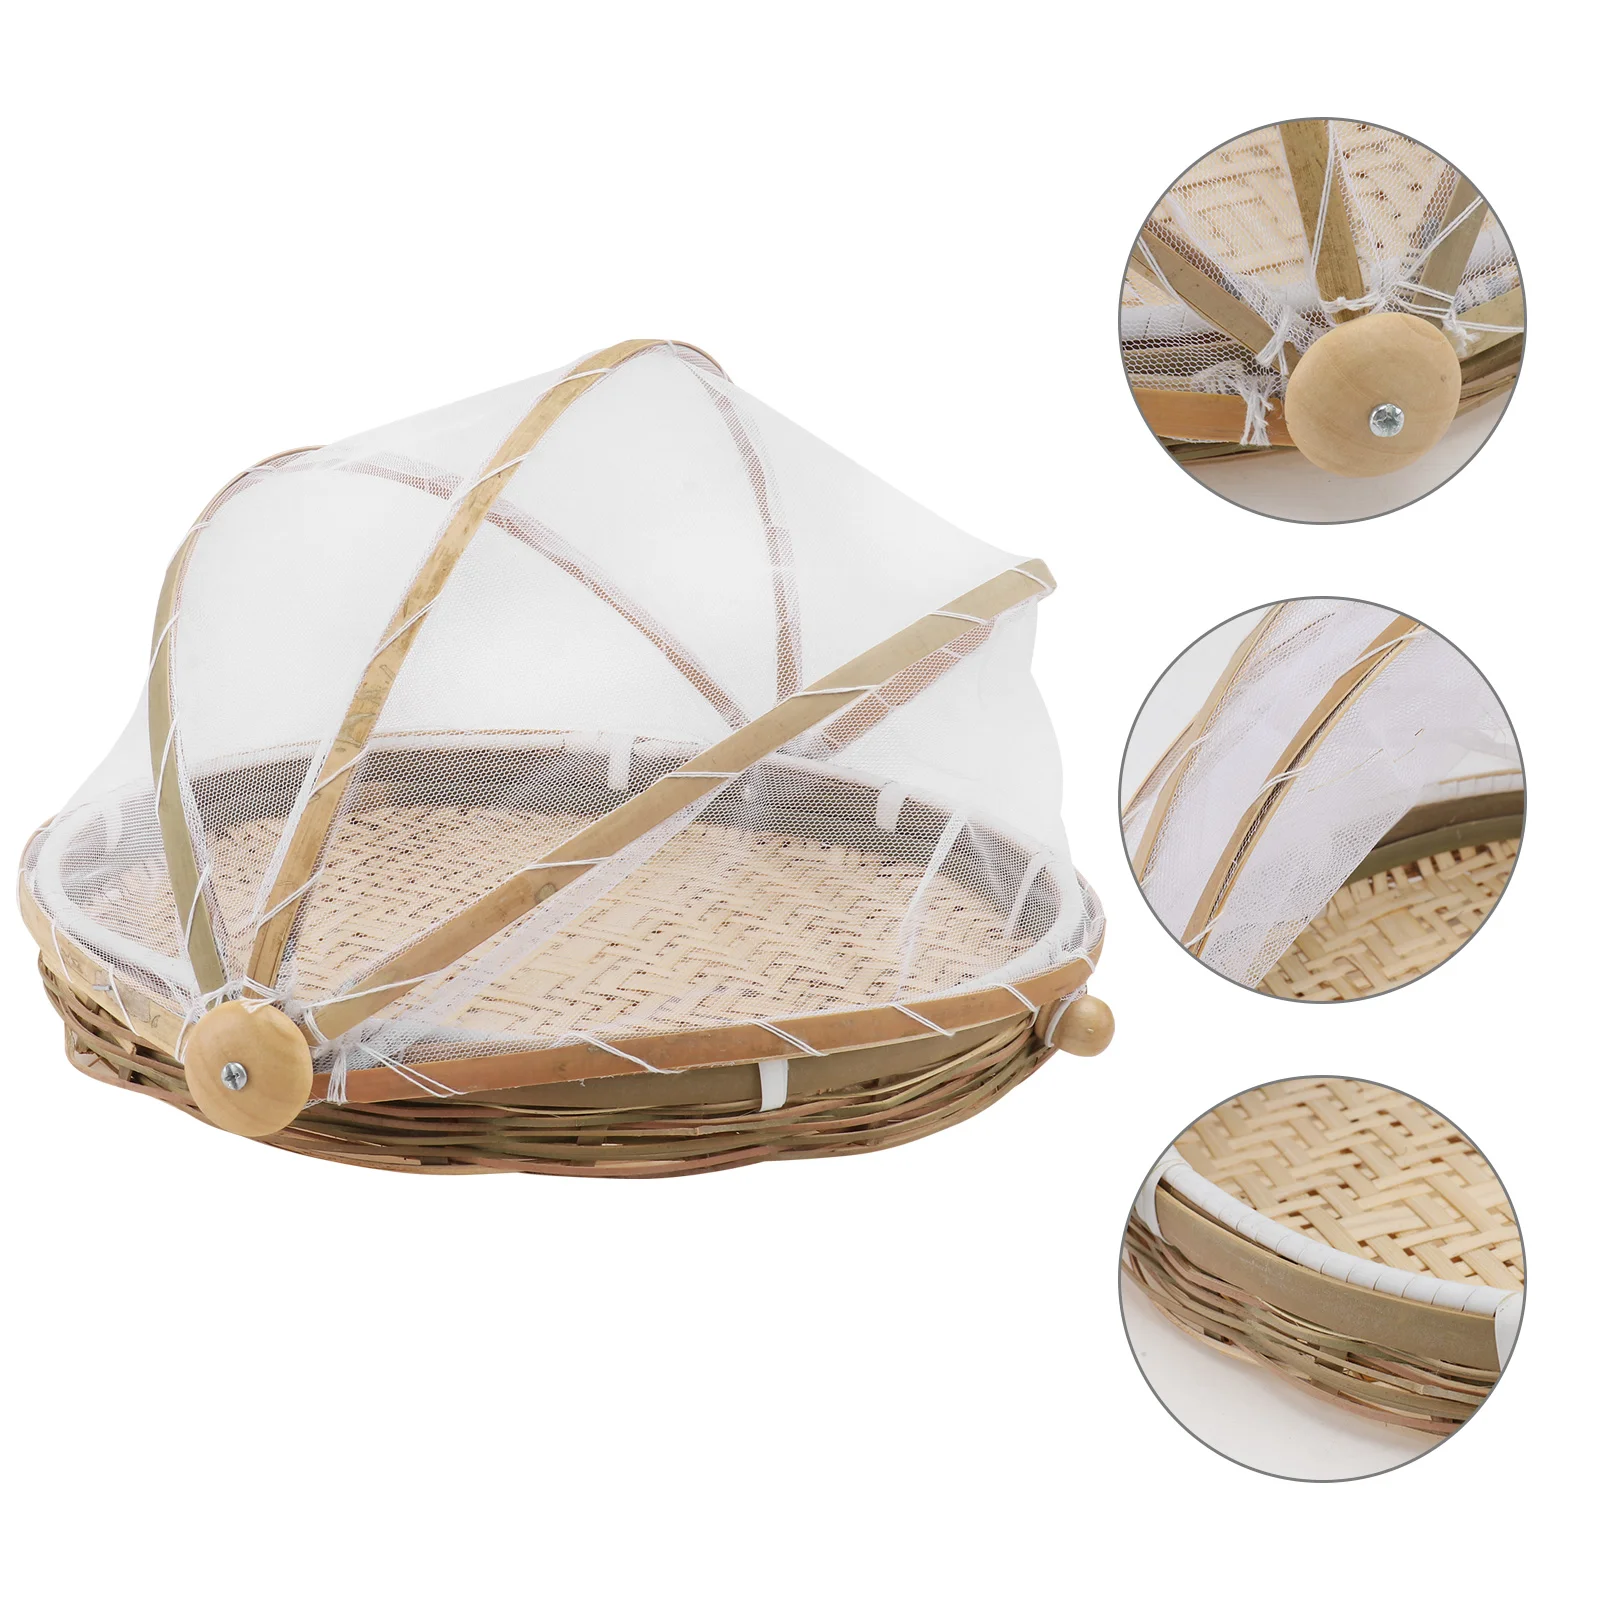 

3 Pcs Round Dustpan Wooden Trays Household Bamboo Woven Sieve Bread Basket Craft Manual Weaving Food Ware